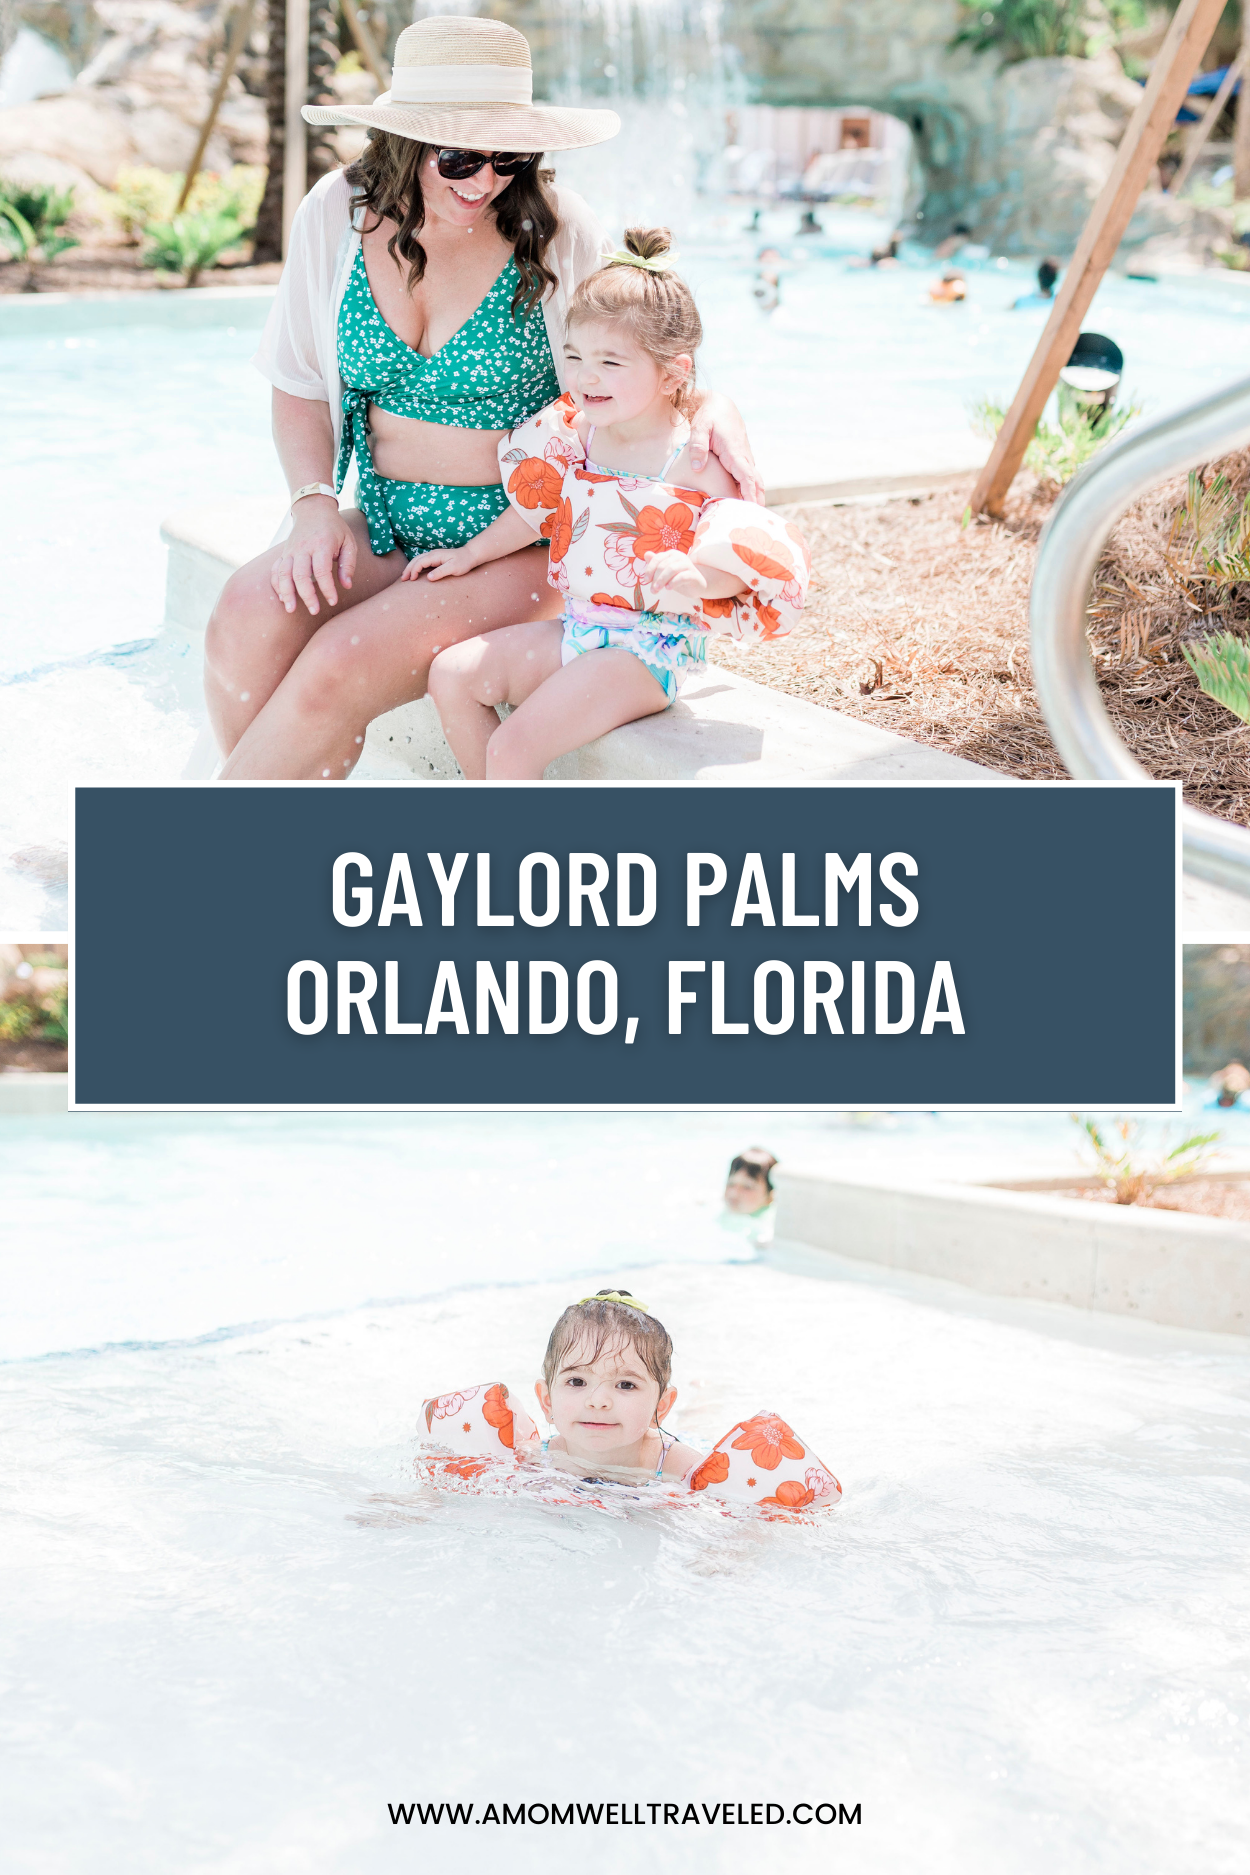 A hotel review for Gaylord Palms in Orlando Kissimee, Florida